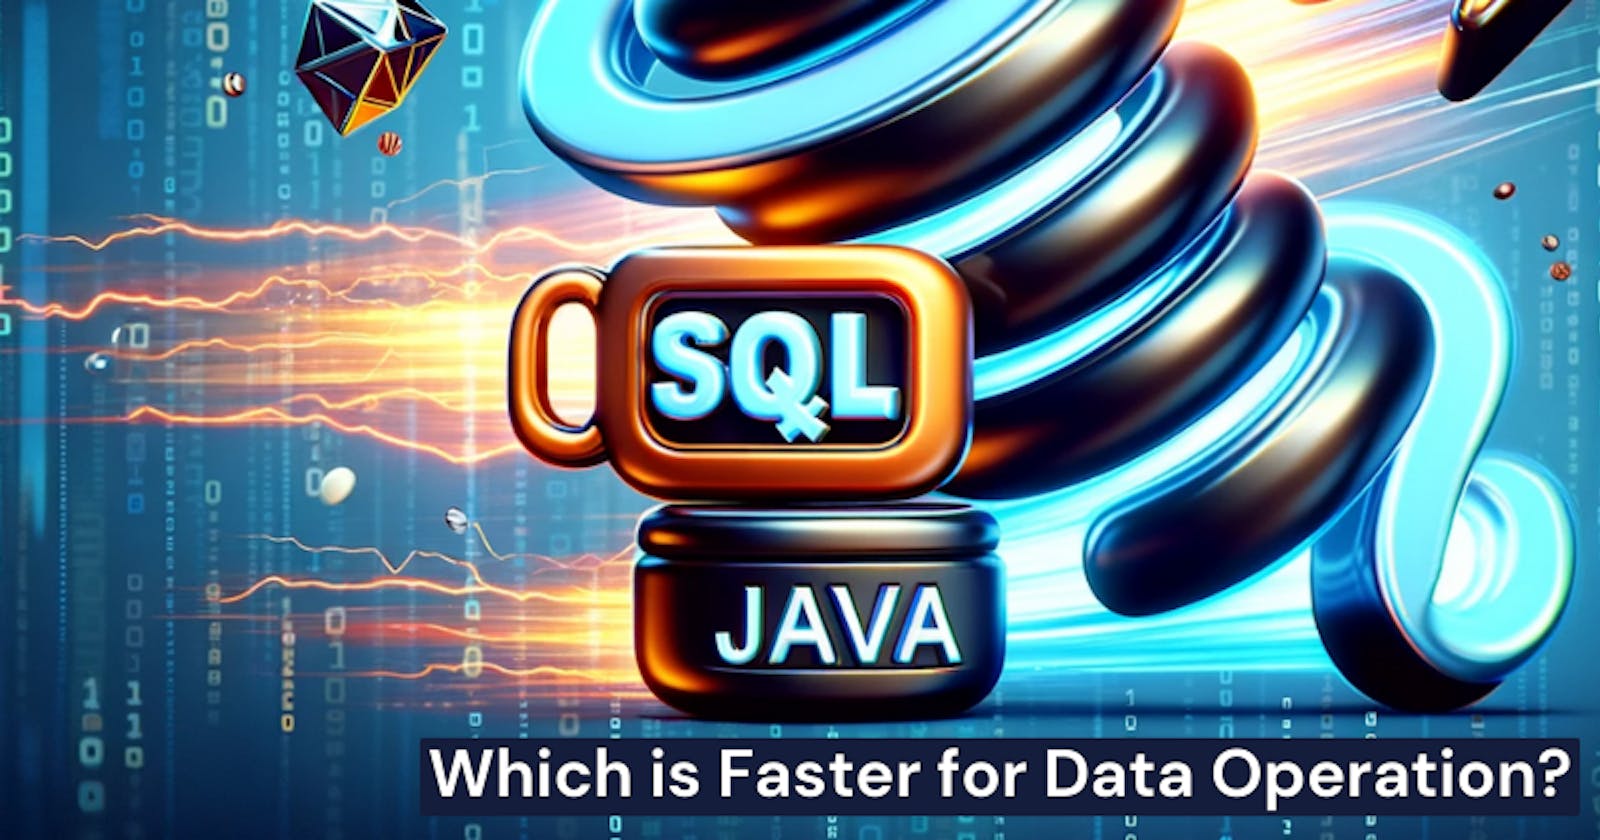 SQL or Java: Which is Faster for Data Operation?